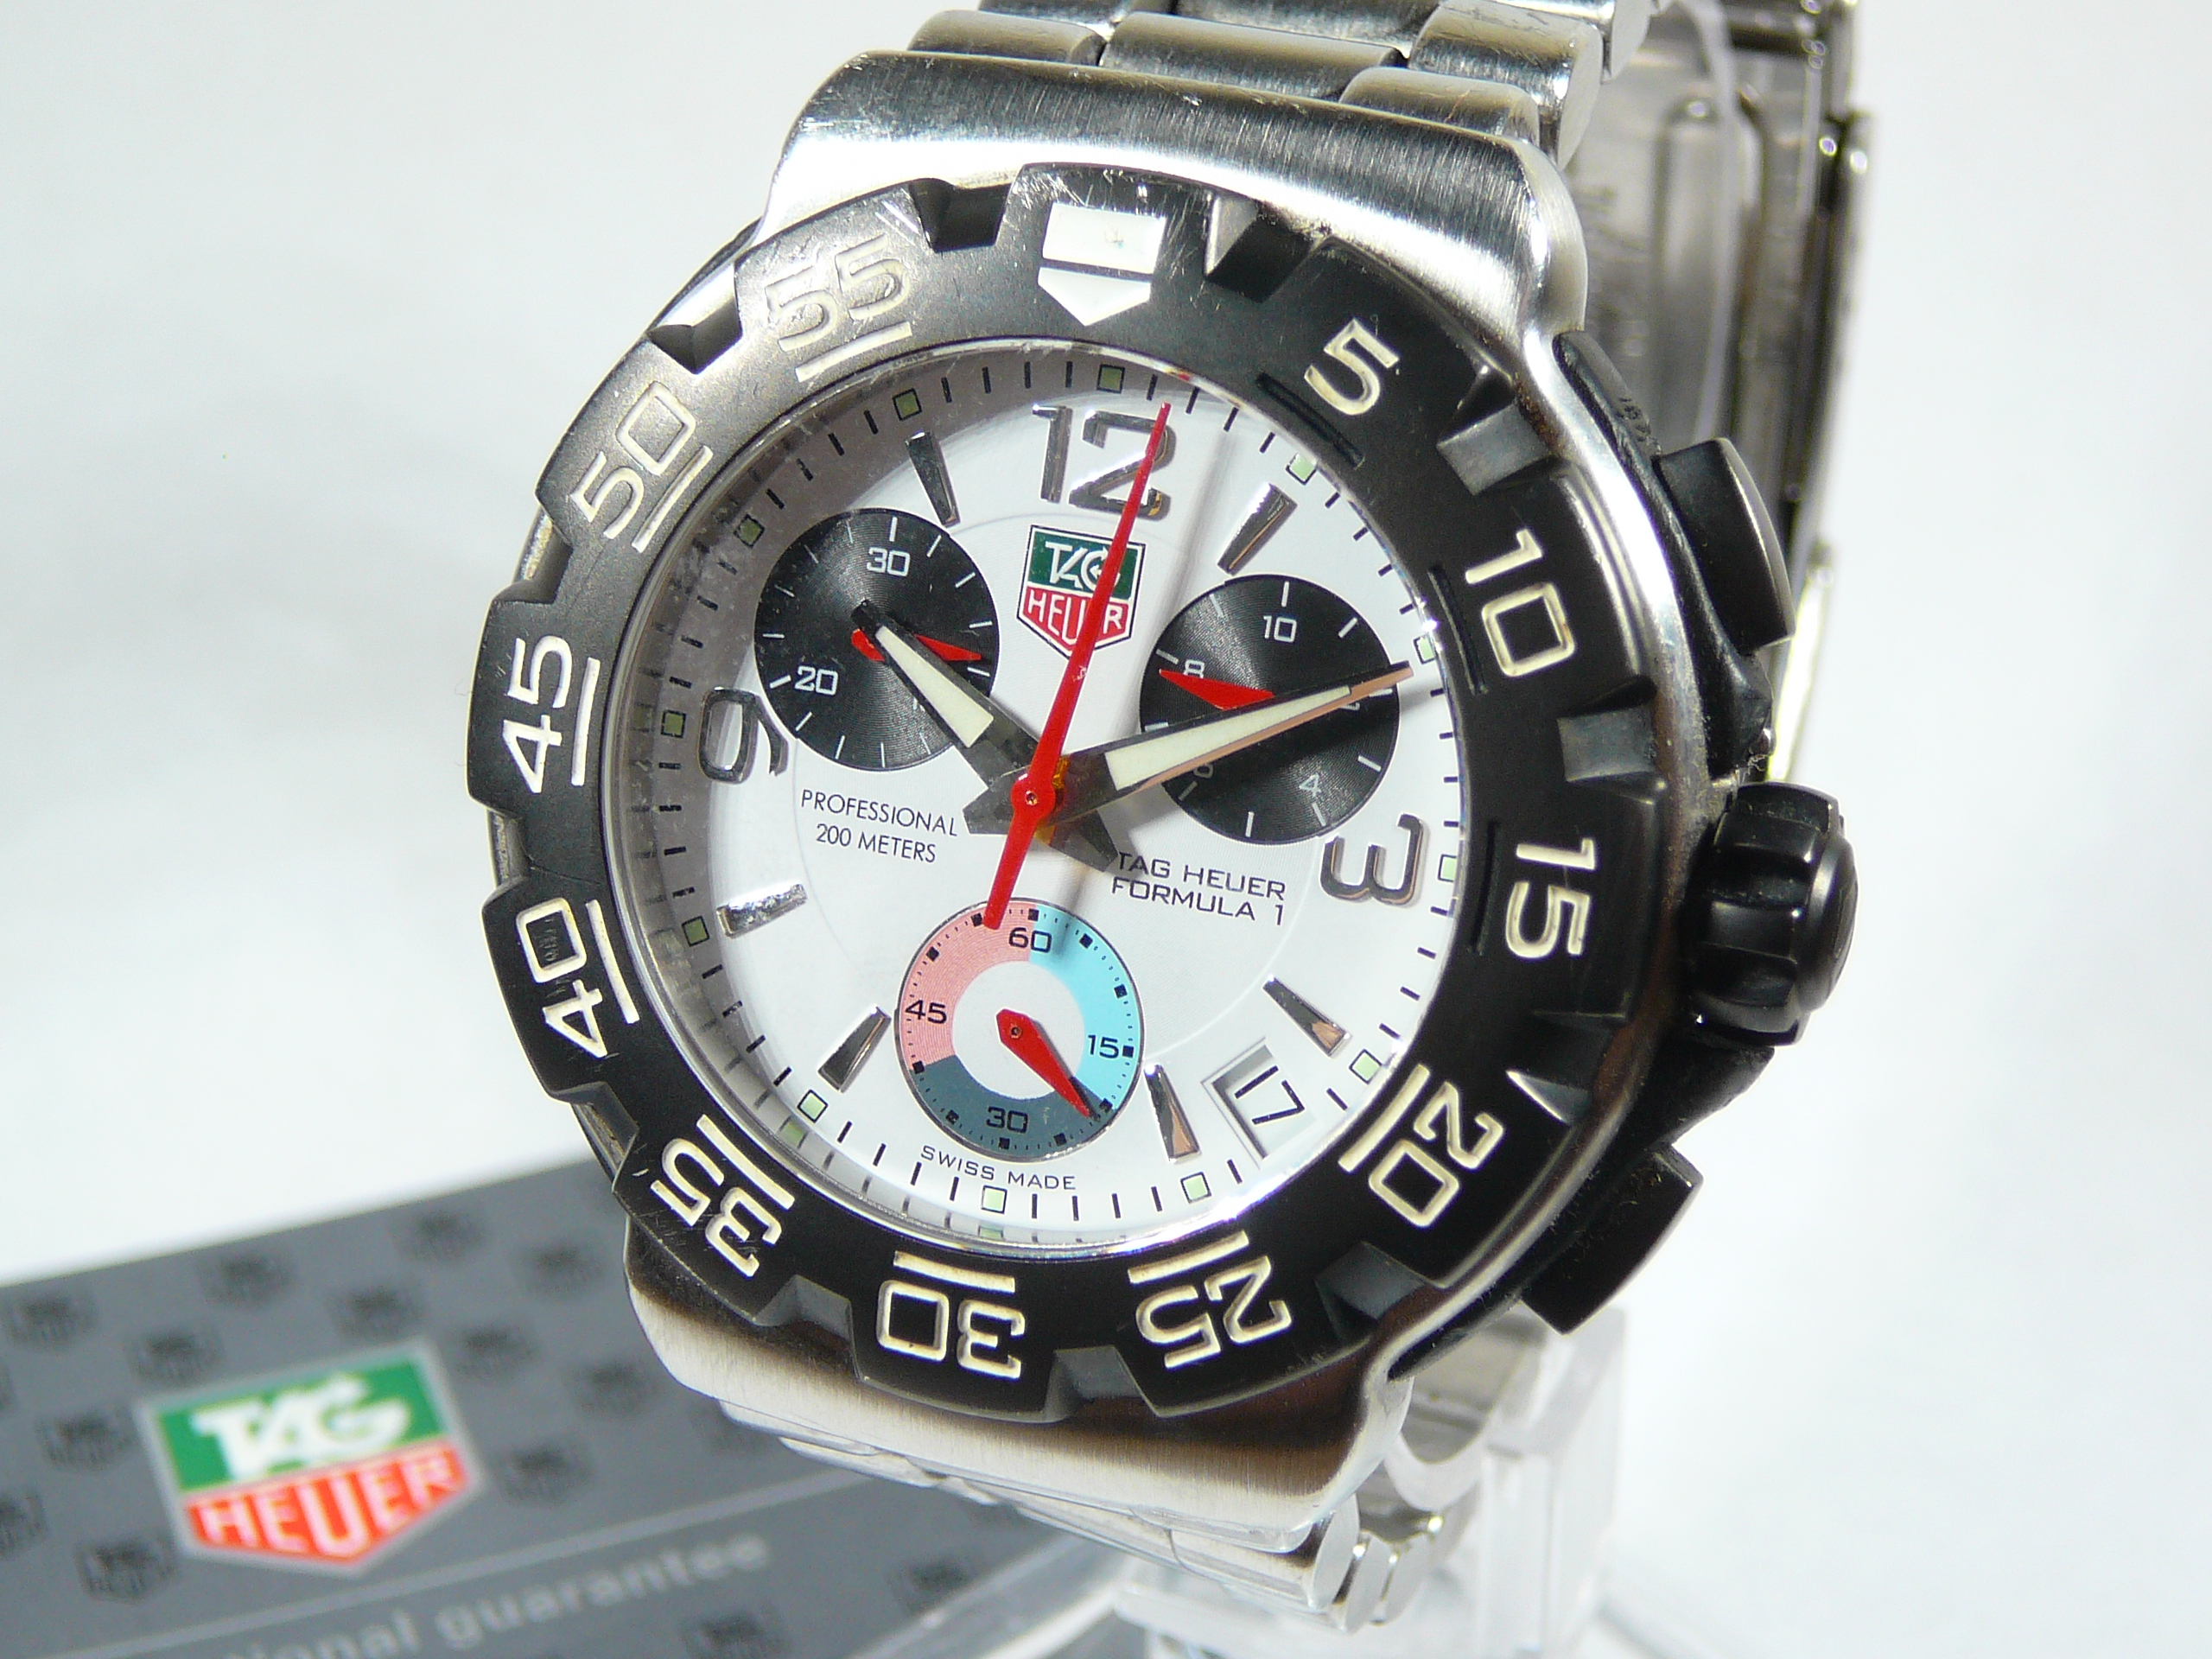 Gents Tag Heuer Wrist Watch - Image 2 of 3